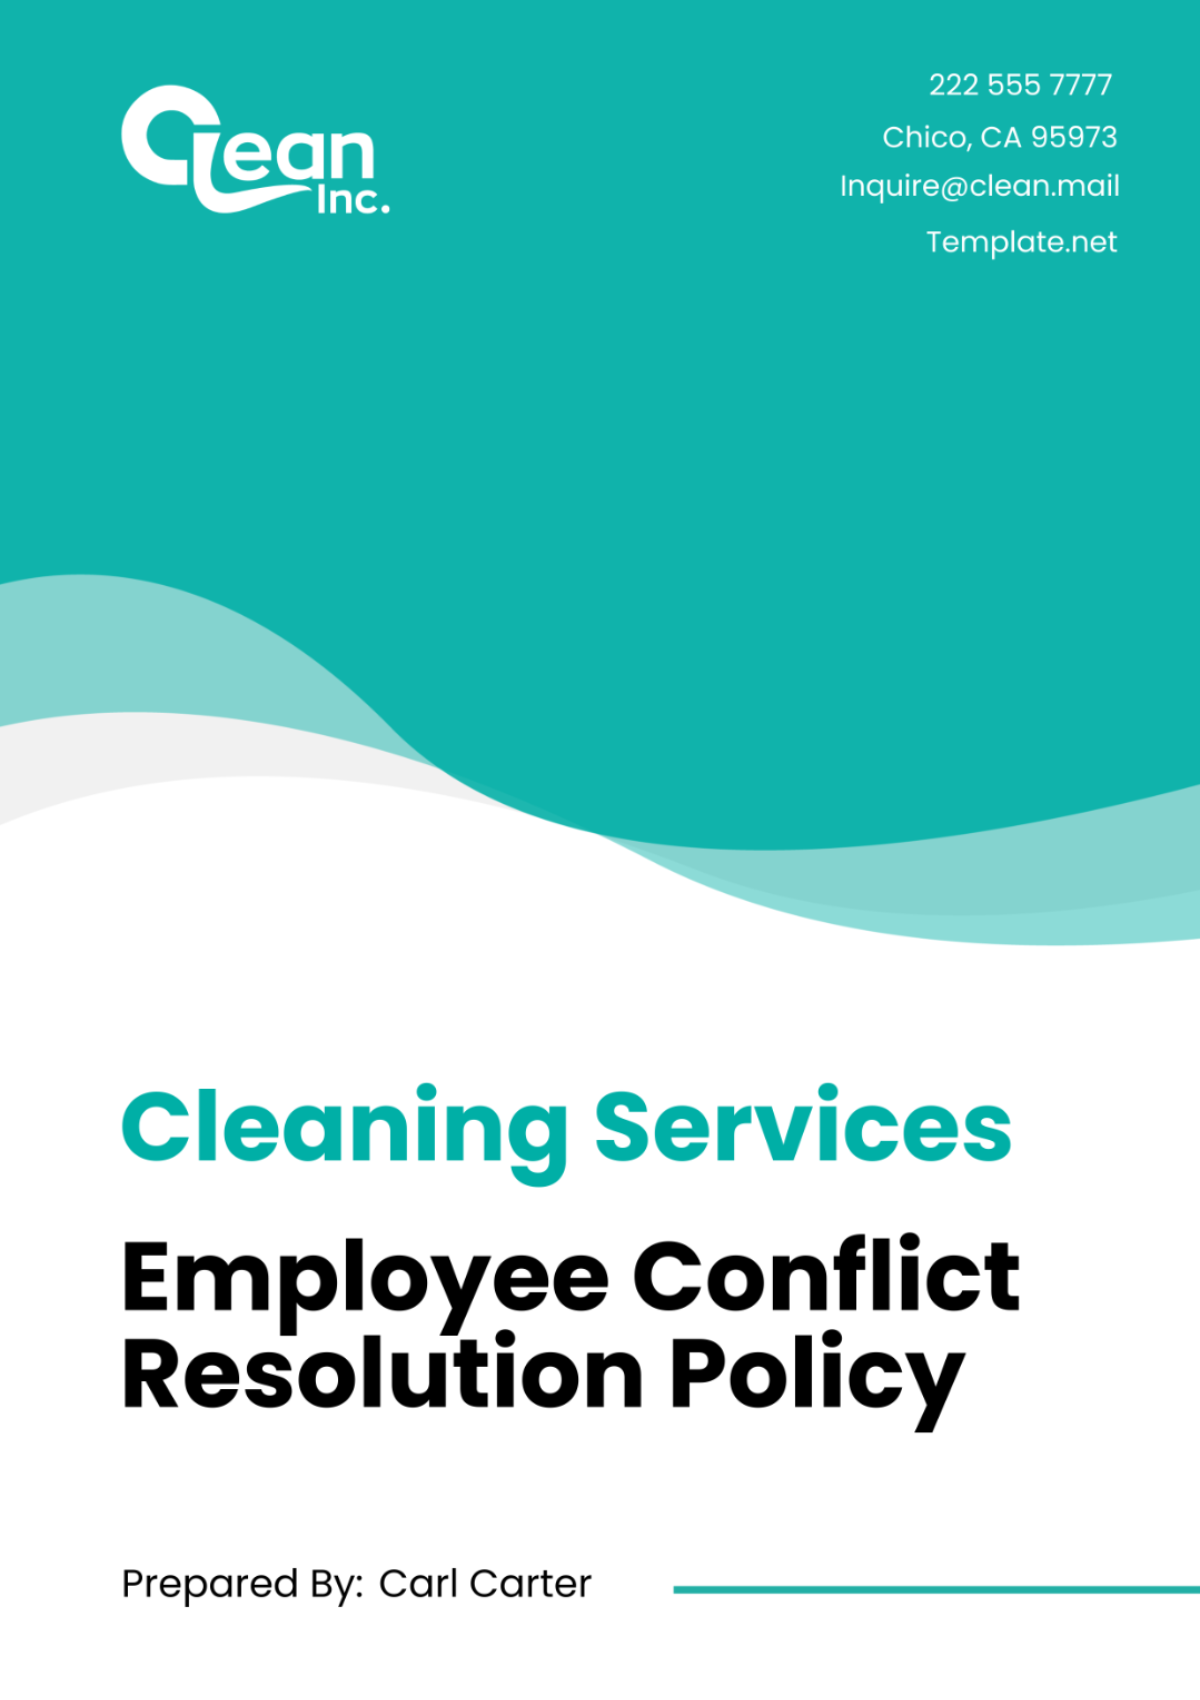 Cleaning Services Employee Conflict Resolution Policy Template